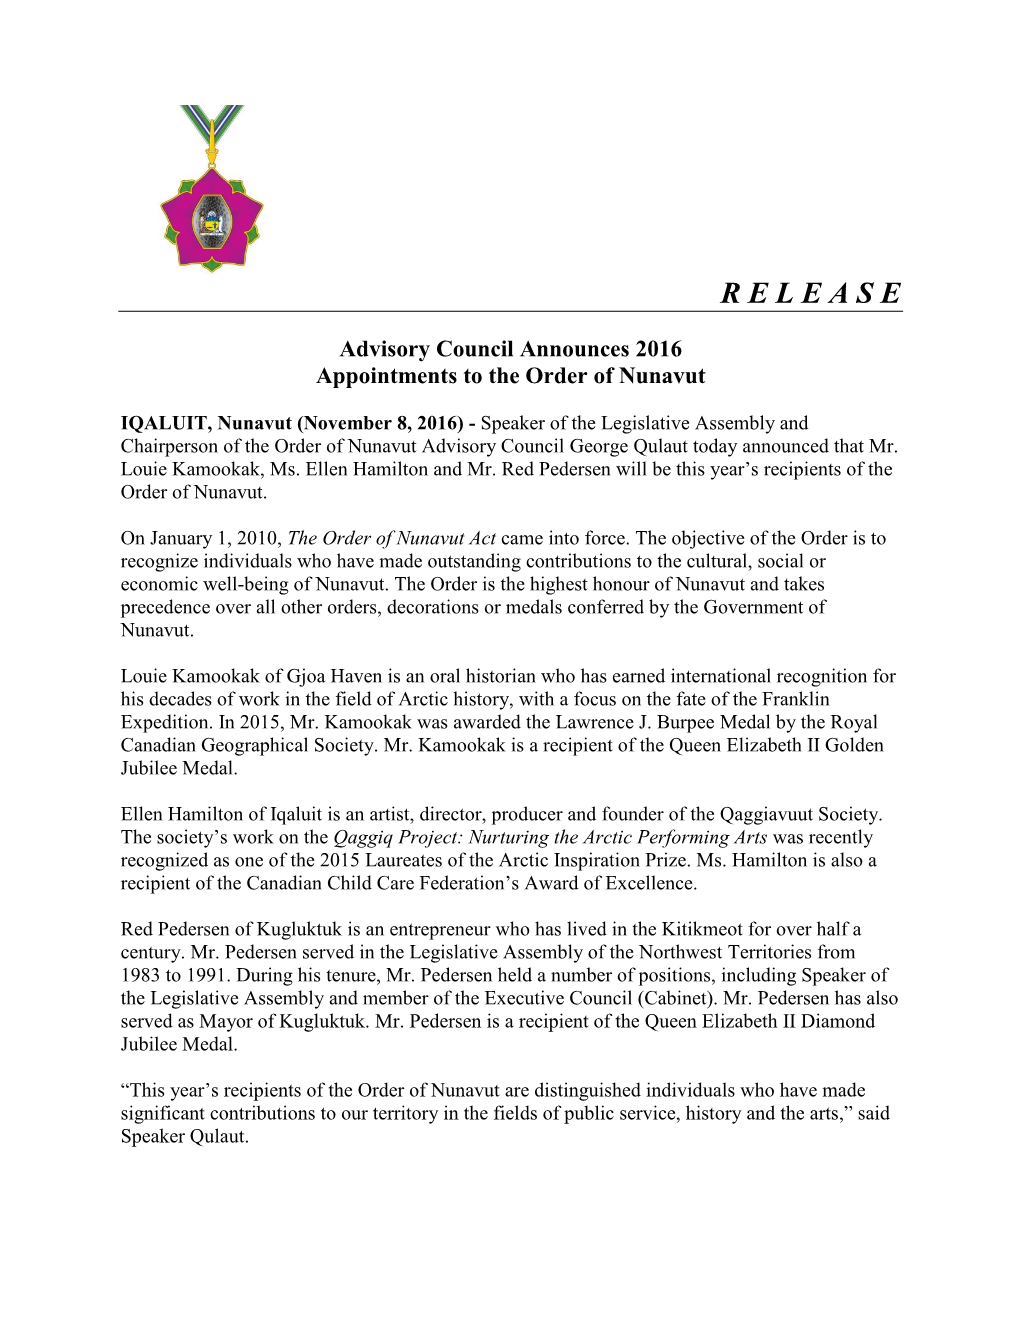 Advisory Council Announces 2016 Appointments to the Order of Nunavut